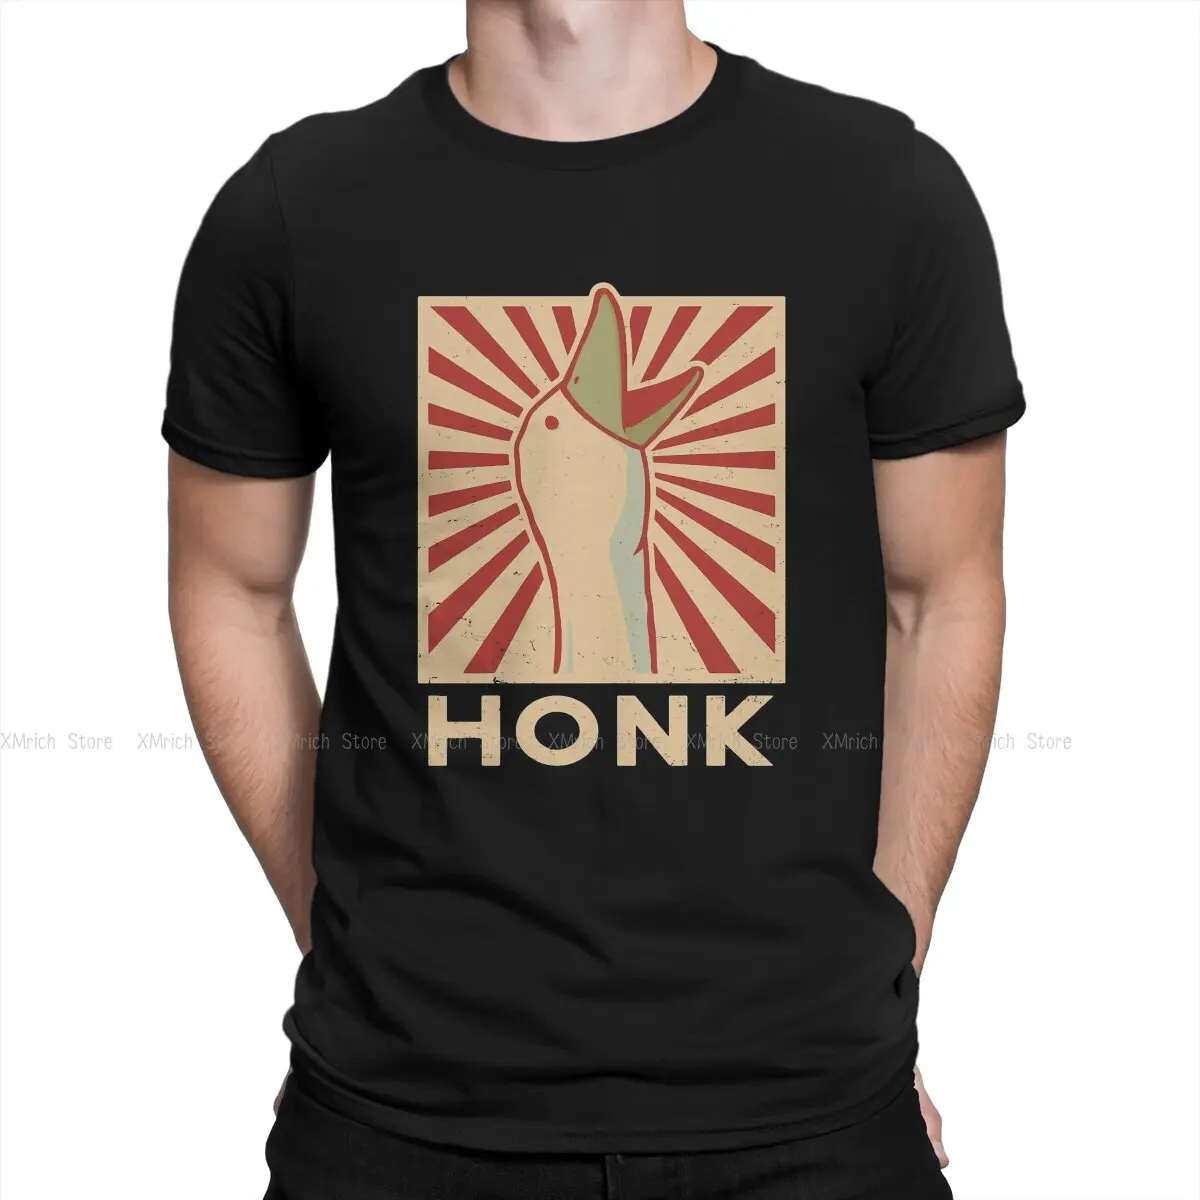 

HONK T-Shirts for Men Untitled Goose Honk Bell Game Internet Meme Casual Cotton Tee Shirt O Neck T Shirt Gift Idea Clothes